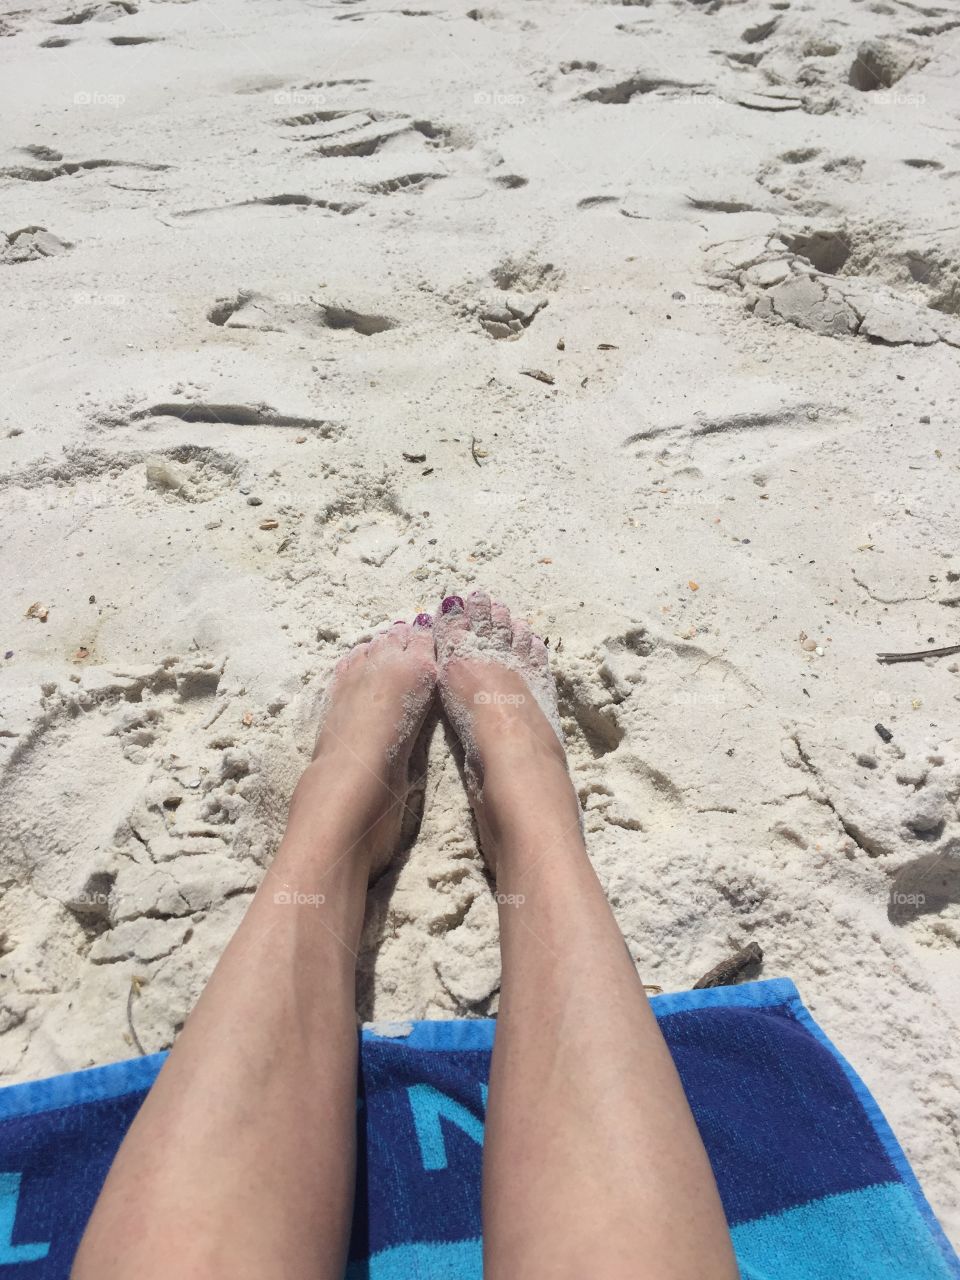 Wife has toes in the sand